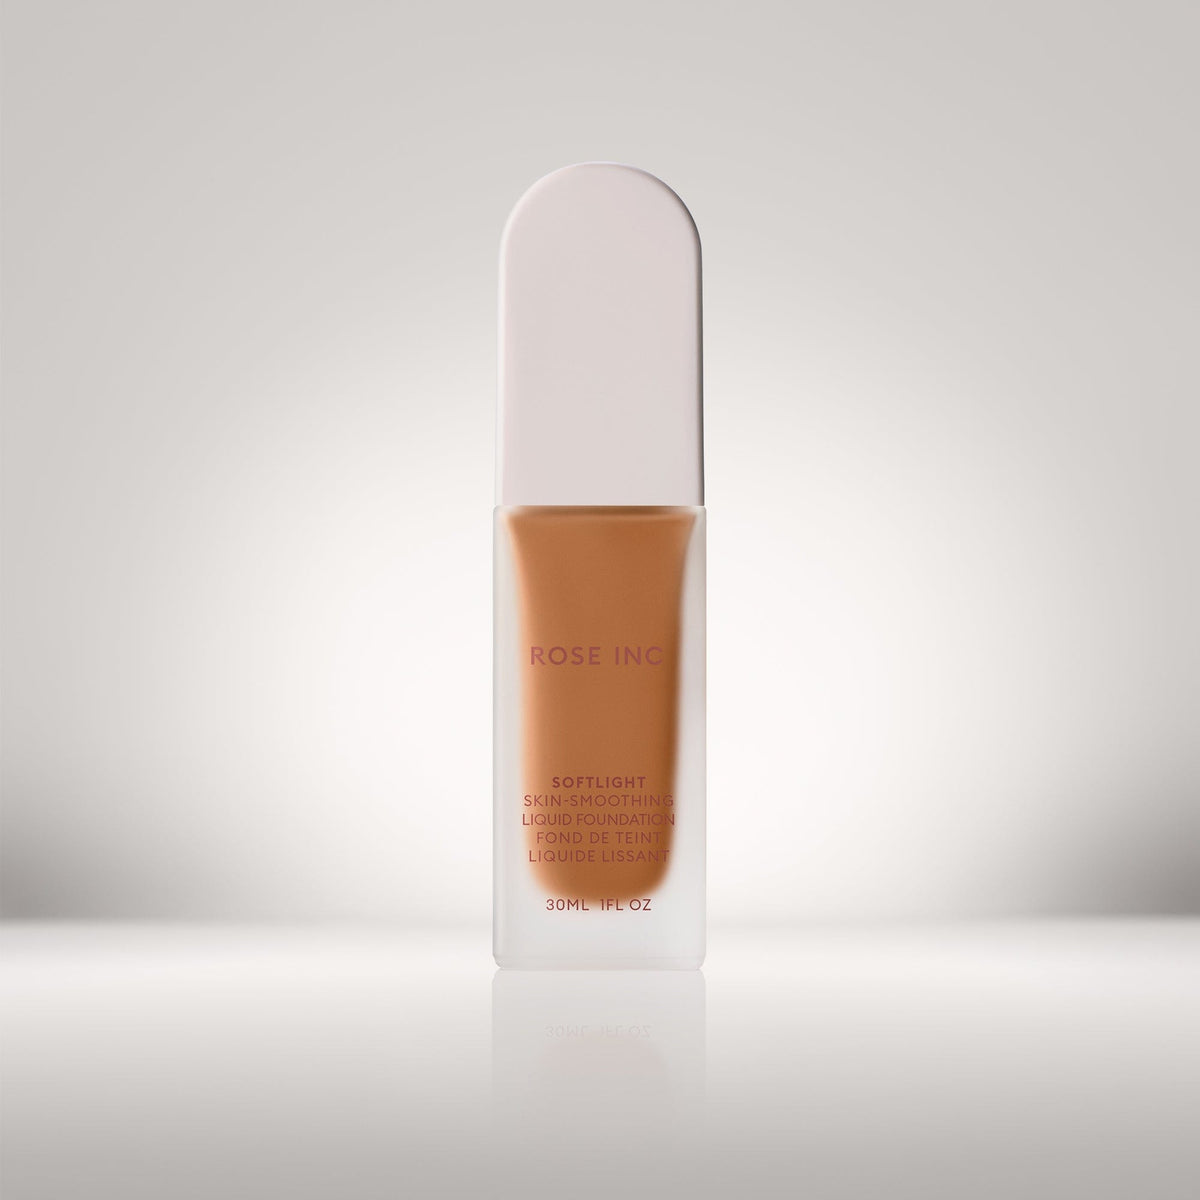 Soldier image of shade 23C in Softlight Smoothing Foundation